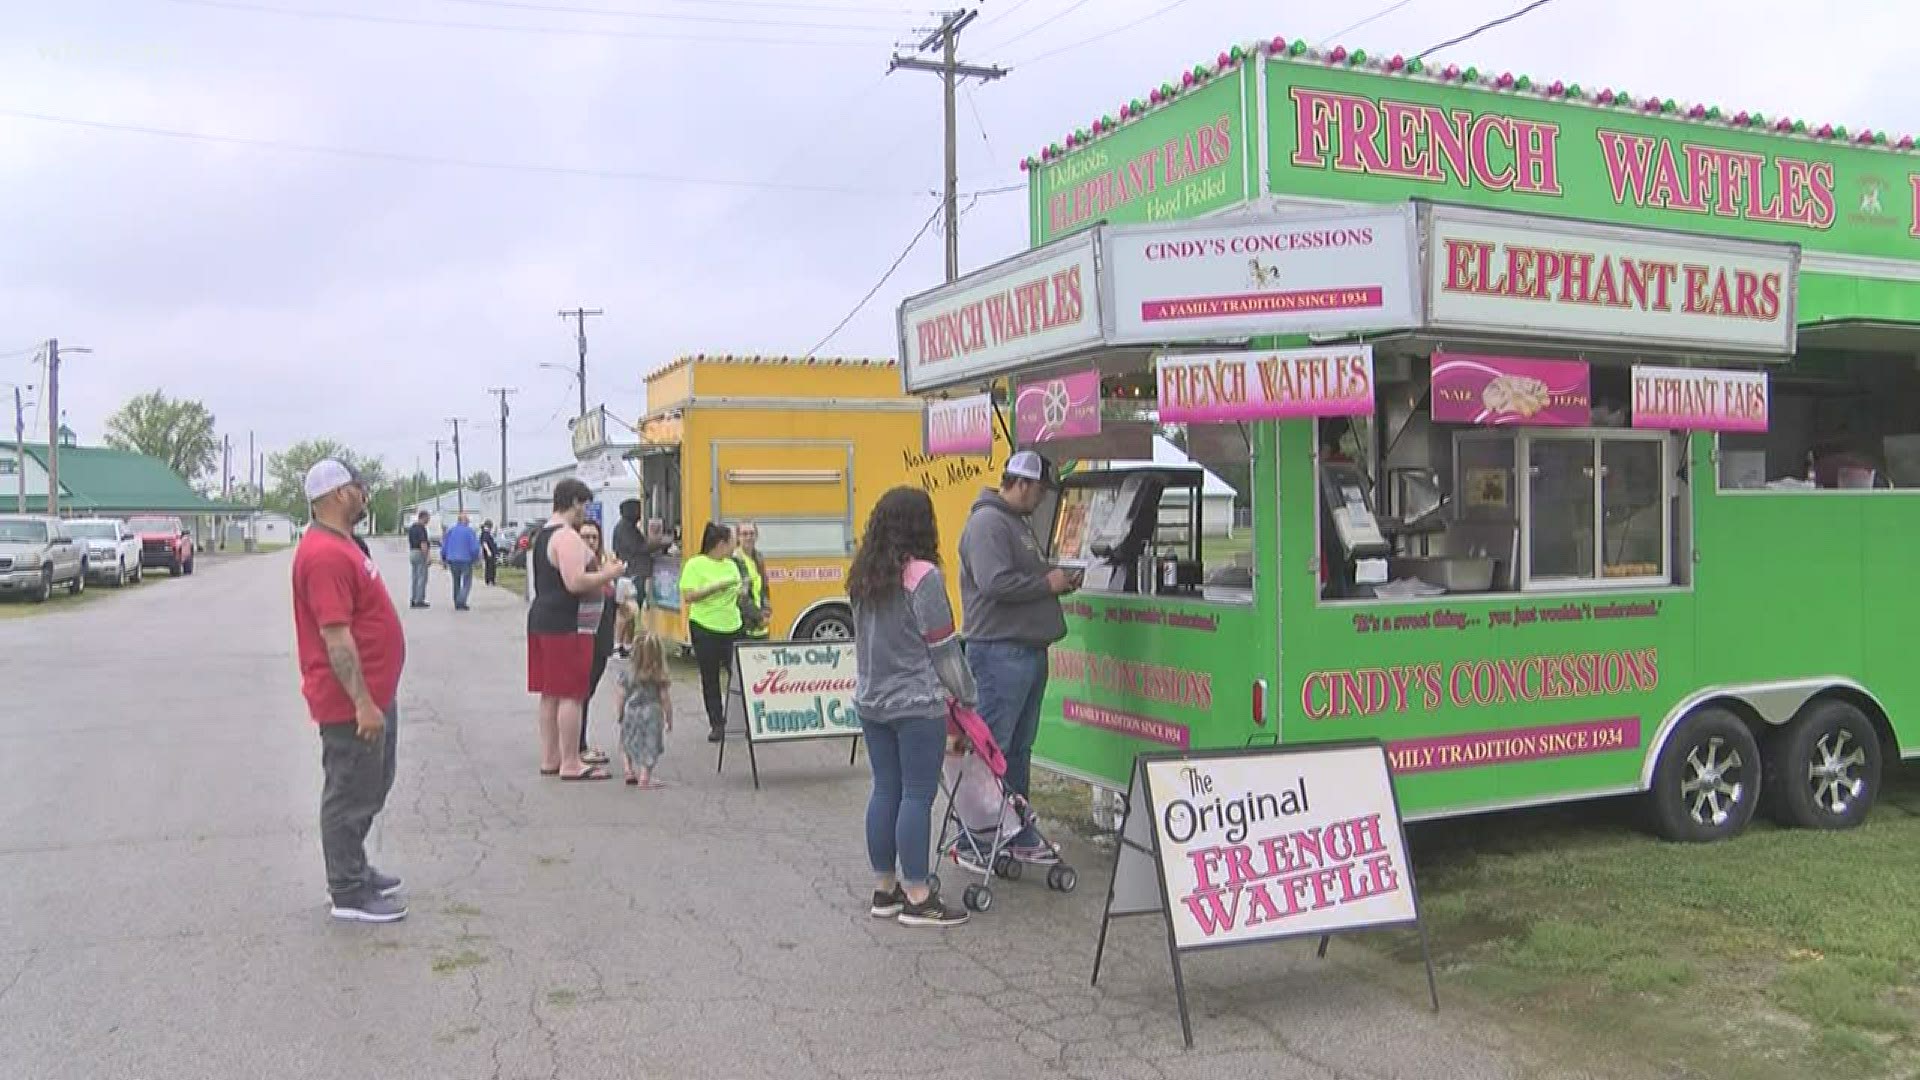 Starting Friday, food vendors will be at the fairgrounds, dishing out those county fair delicacies.